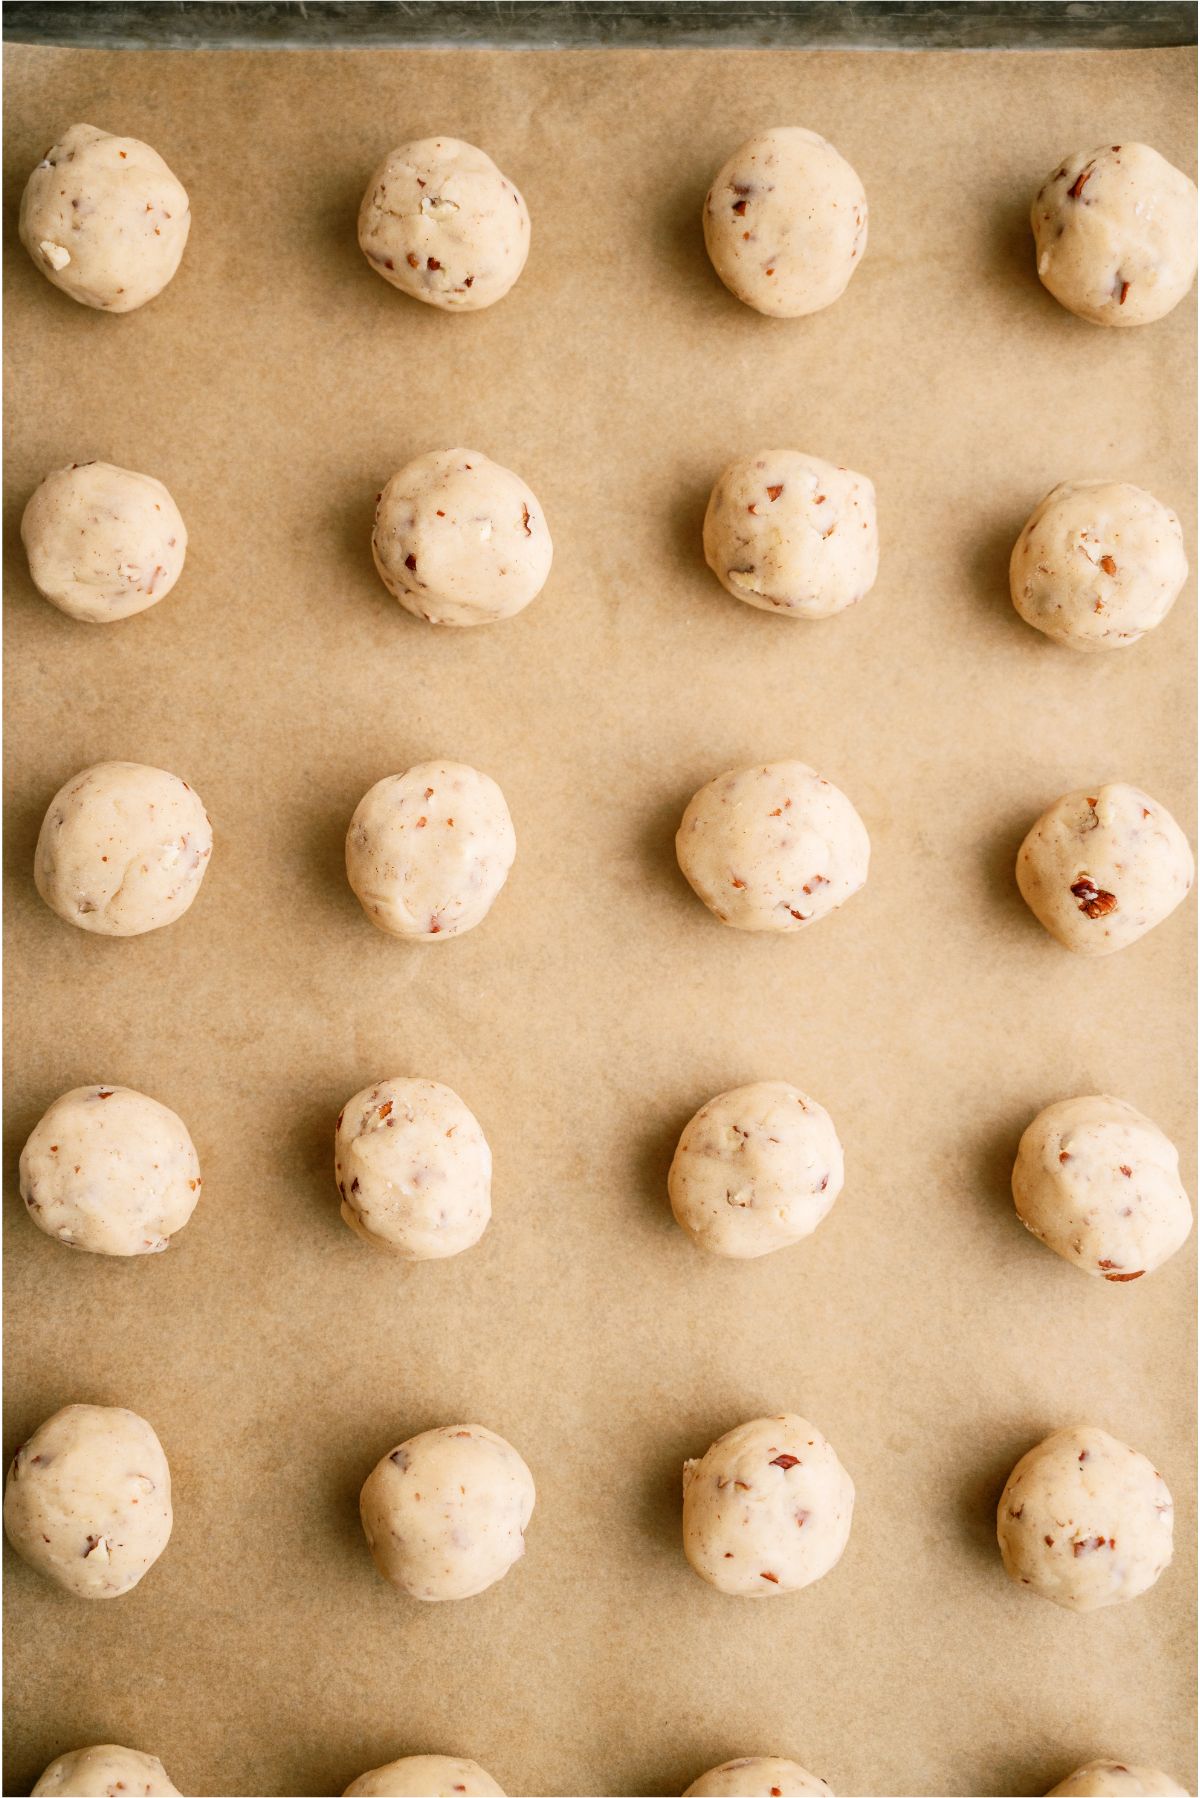 Unbaked Mexican Wedding Cookies on baking sheet